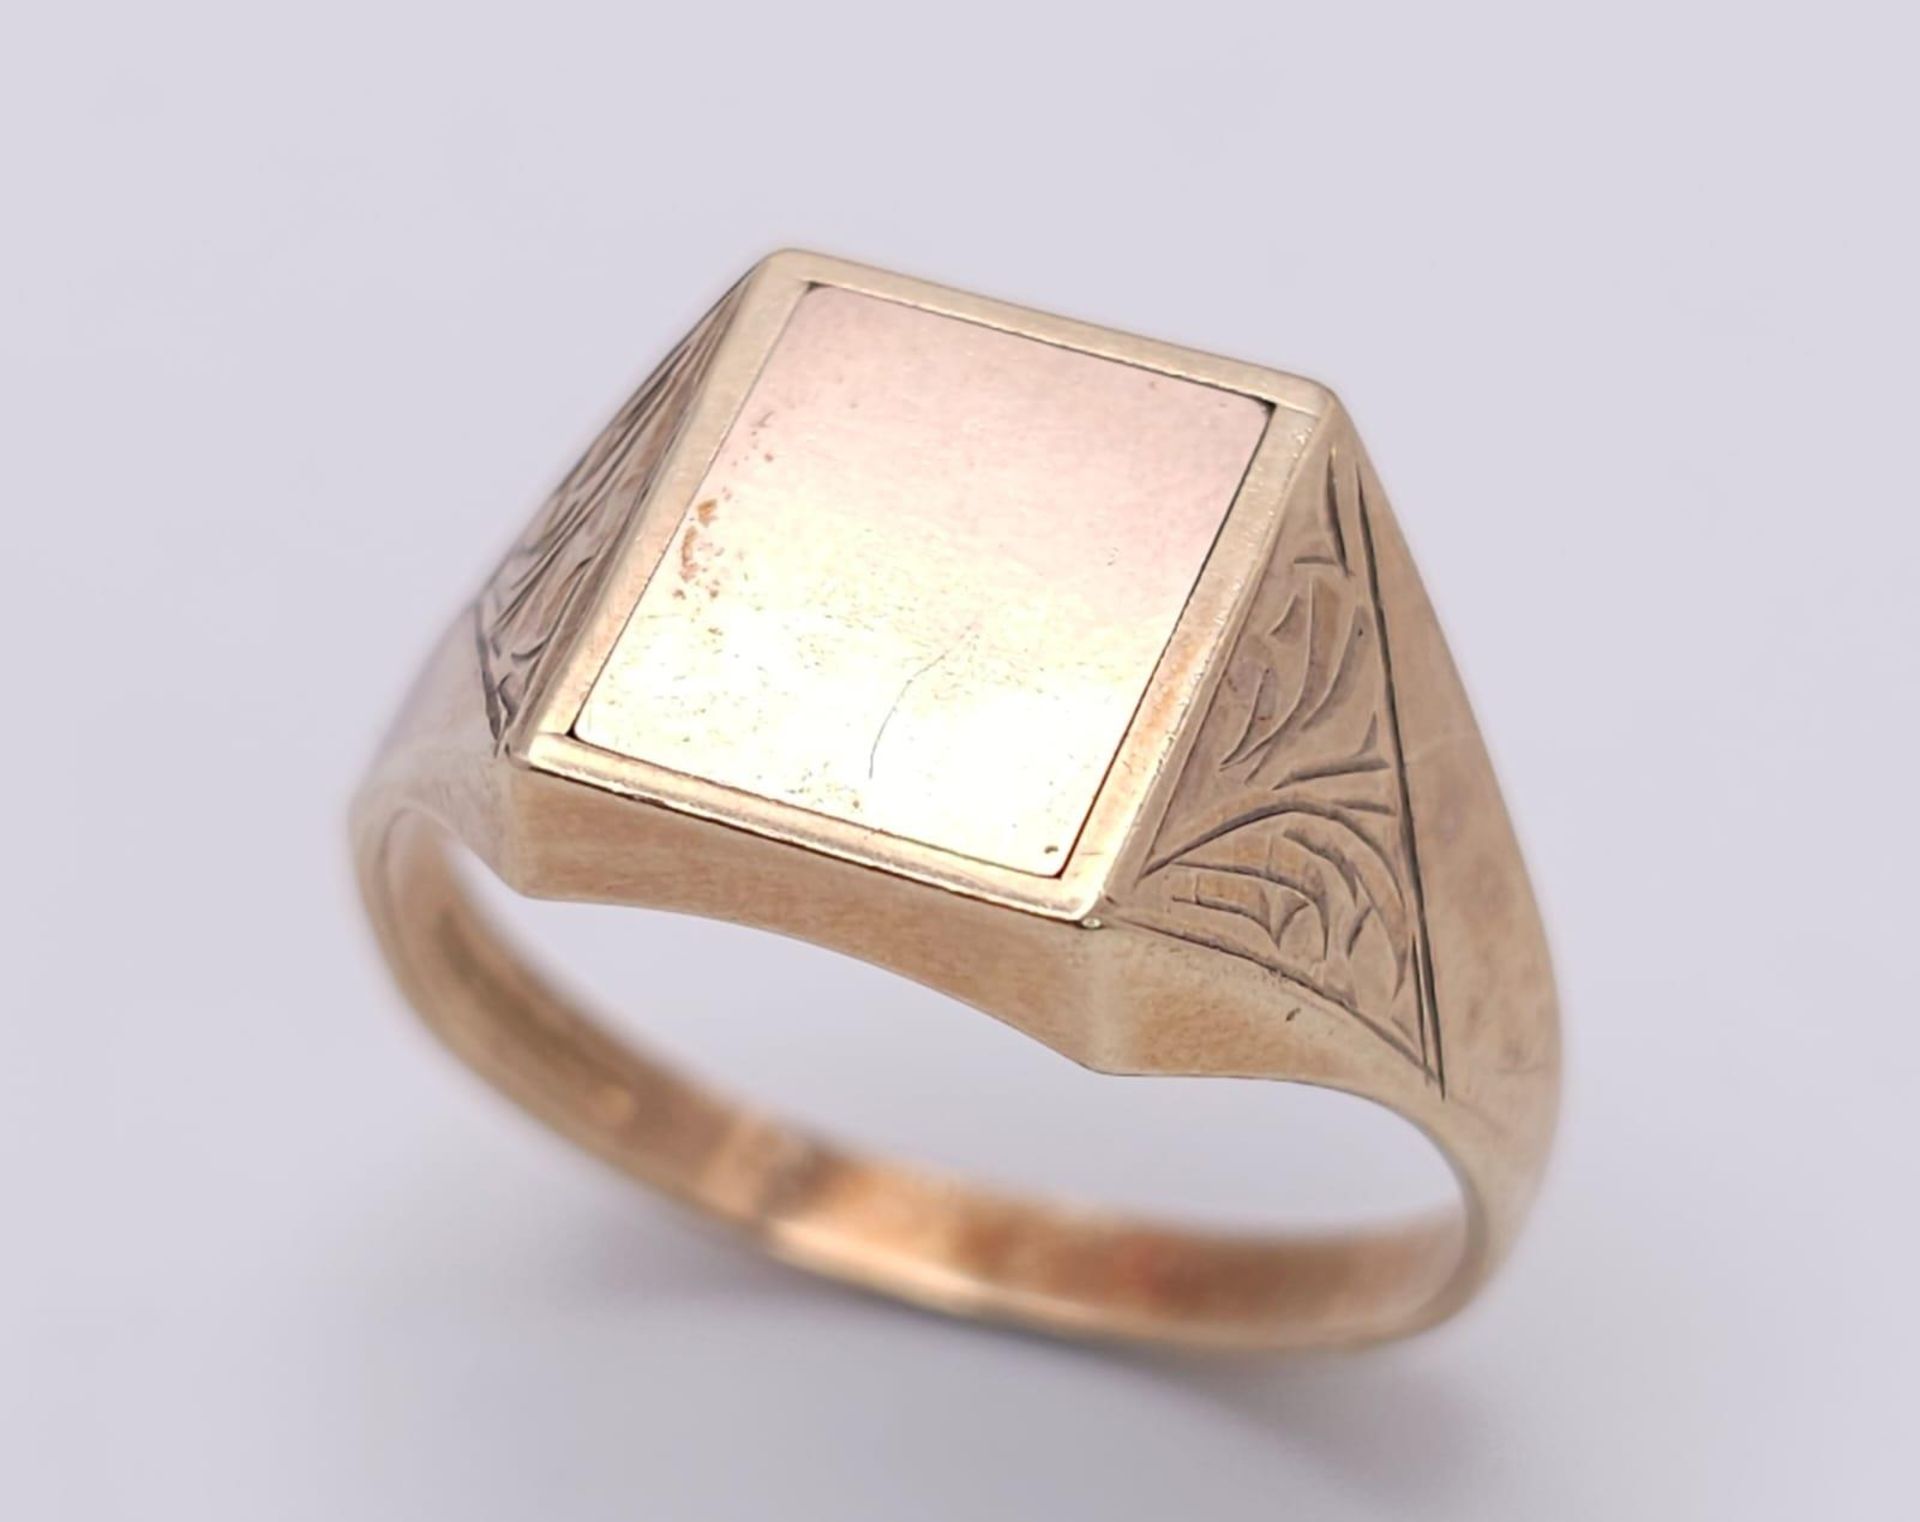 A GENTS 9K GOLD SIGNET RING WITH A HIDDEN MASONIC SYMBOL ON THE REVERSE, ENGRAVED PATTERN